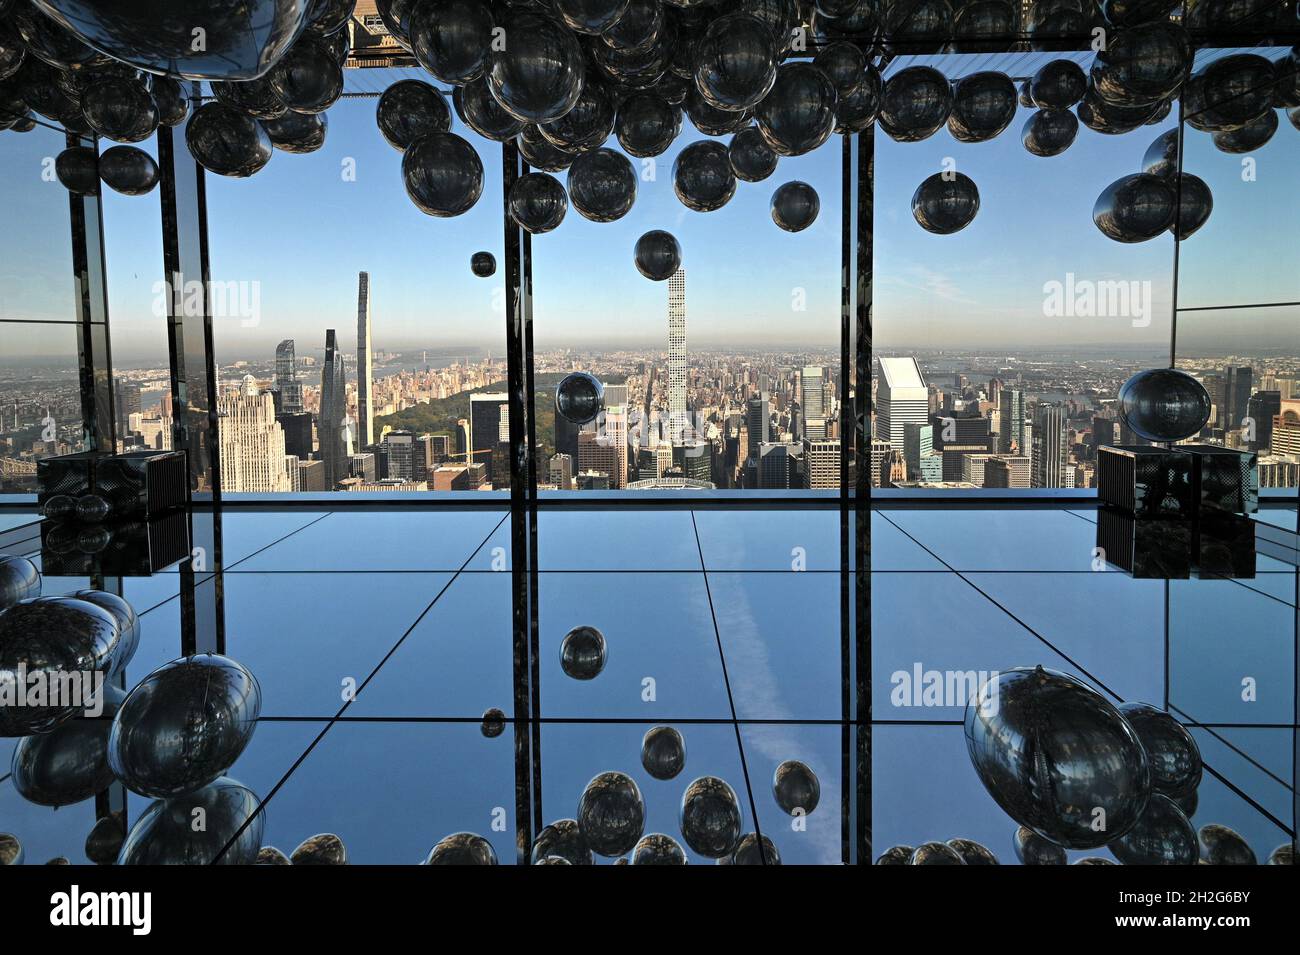 New York, USA. 21st Oct, 2021. Views inside Summit One Vanderbilt during the ribbon cutting ceremony for the grand opening of the latest sky-high immersive experience, New York, NY, October 21, 2021. Summit One Vanderbilt is an immersive experience and observation deck featuring the permanent 'Air' installation by Kenzo Digital, including an outdoor terrace, a glass elevator on the exterior of the building, and glass bottom booths overlooking Madison Avenue.(Photo by Anthony Behar/Sipa USA) Credit: Sipa USA/Alamy Live News Stock Photo